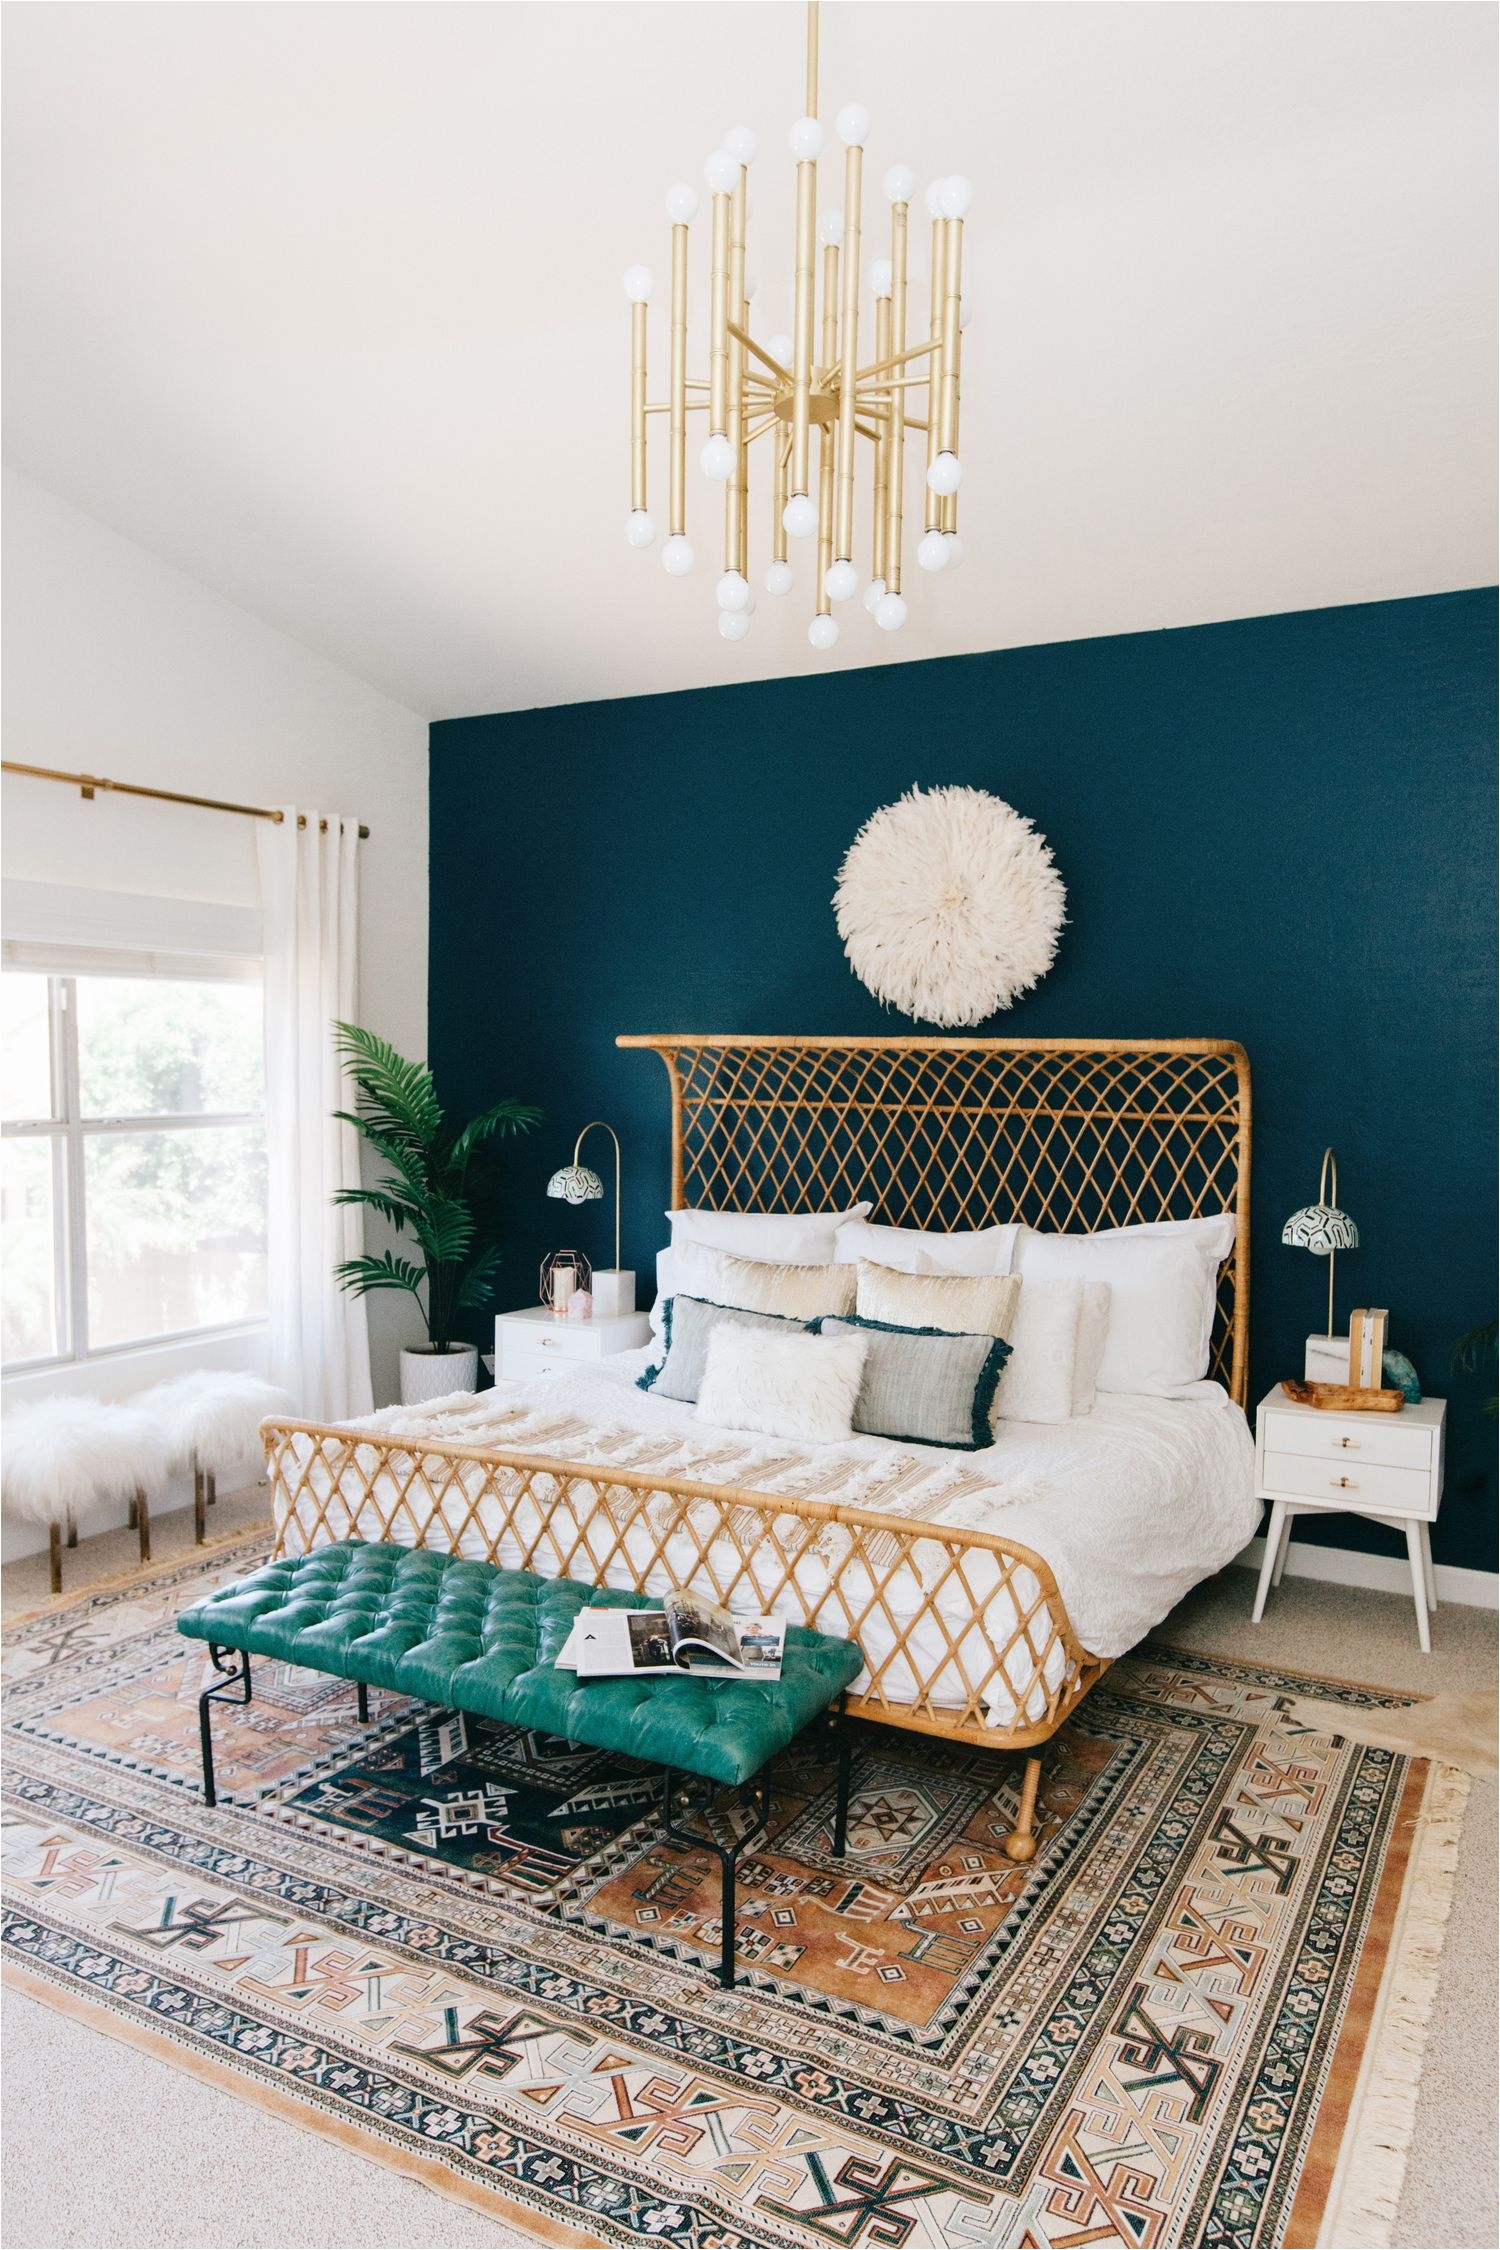 rattan king size bed against a teal wall with a boho rug and teal tufted leather bench makes for a cozy and eclectic master bedroom